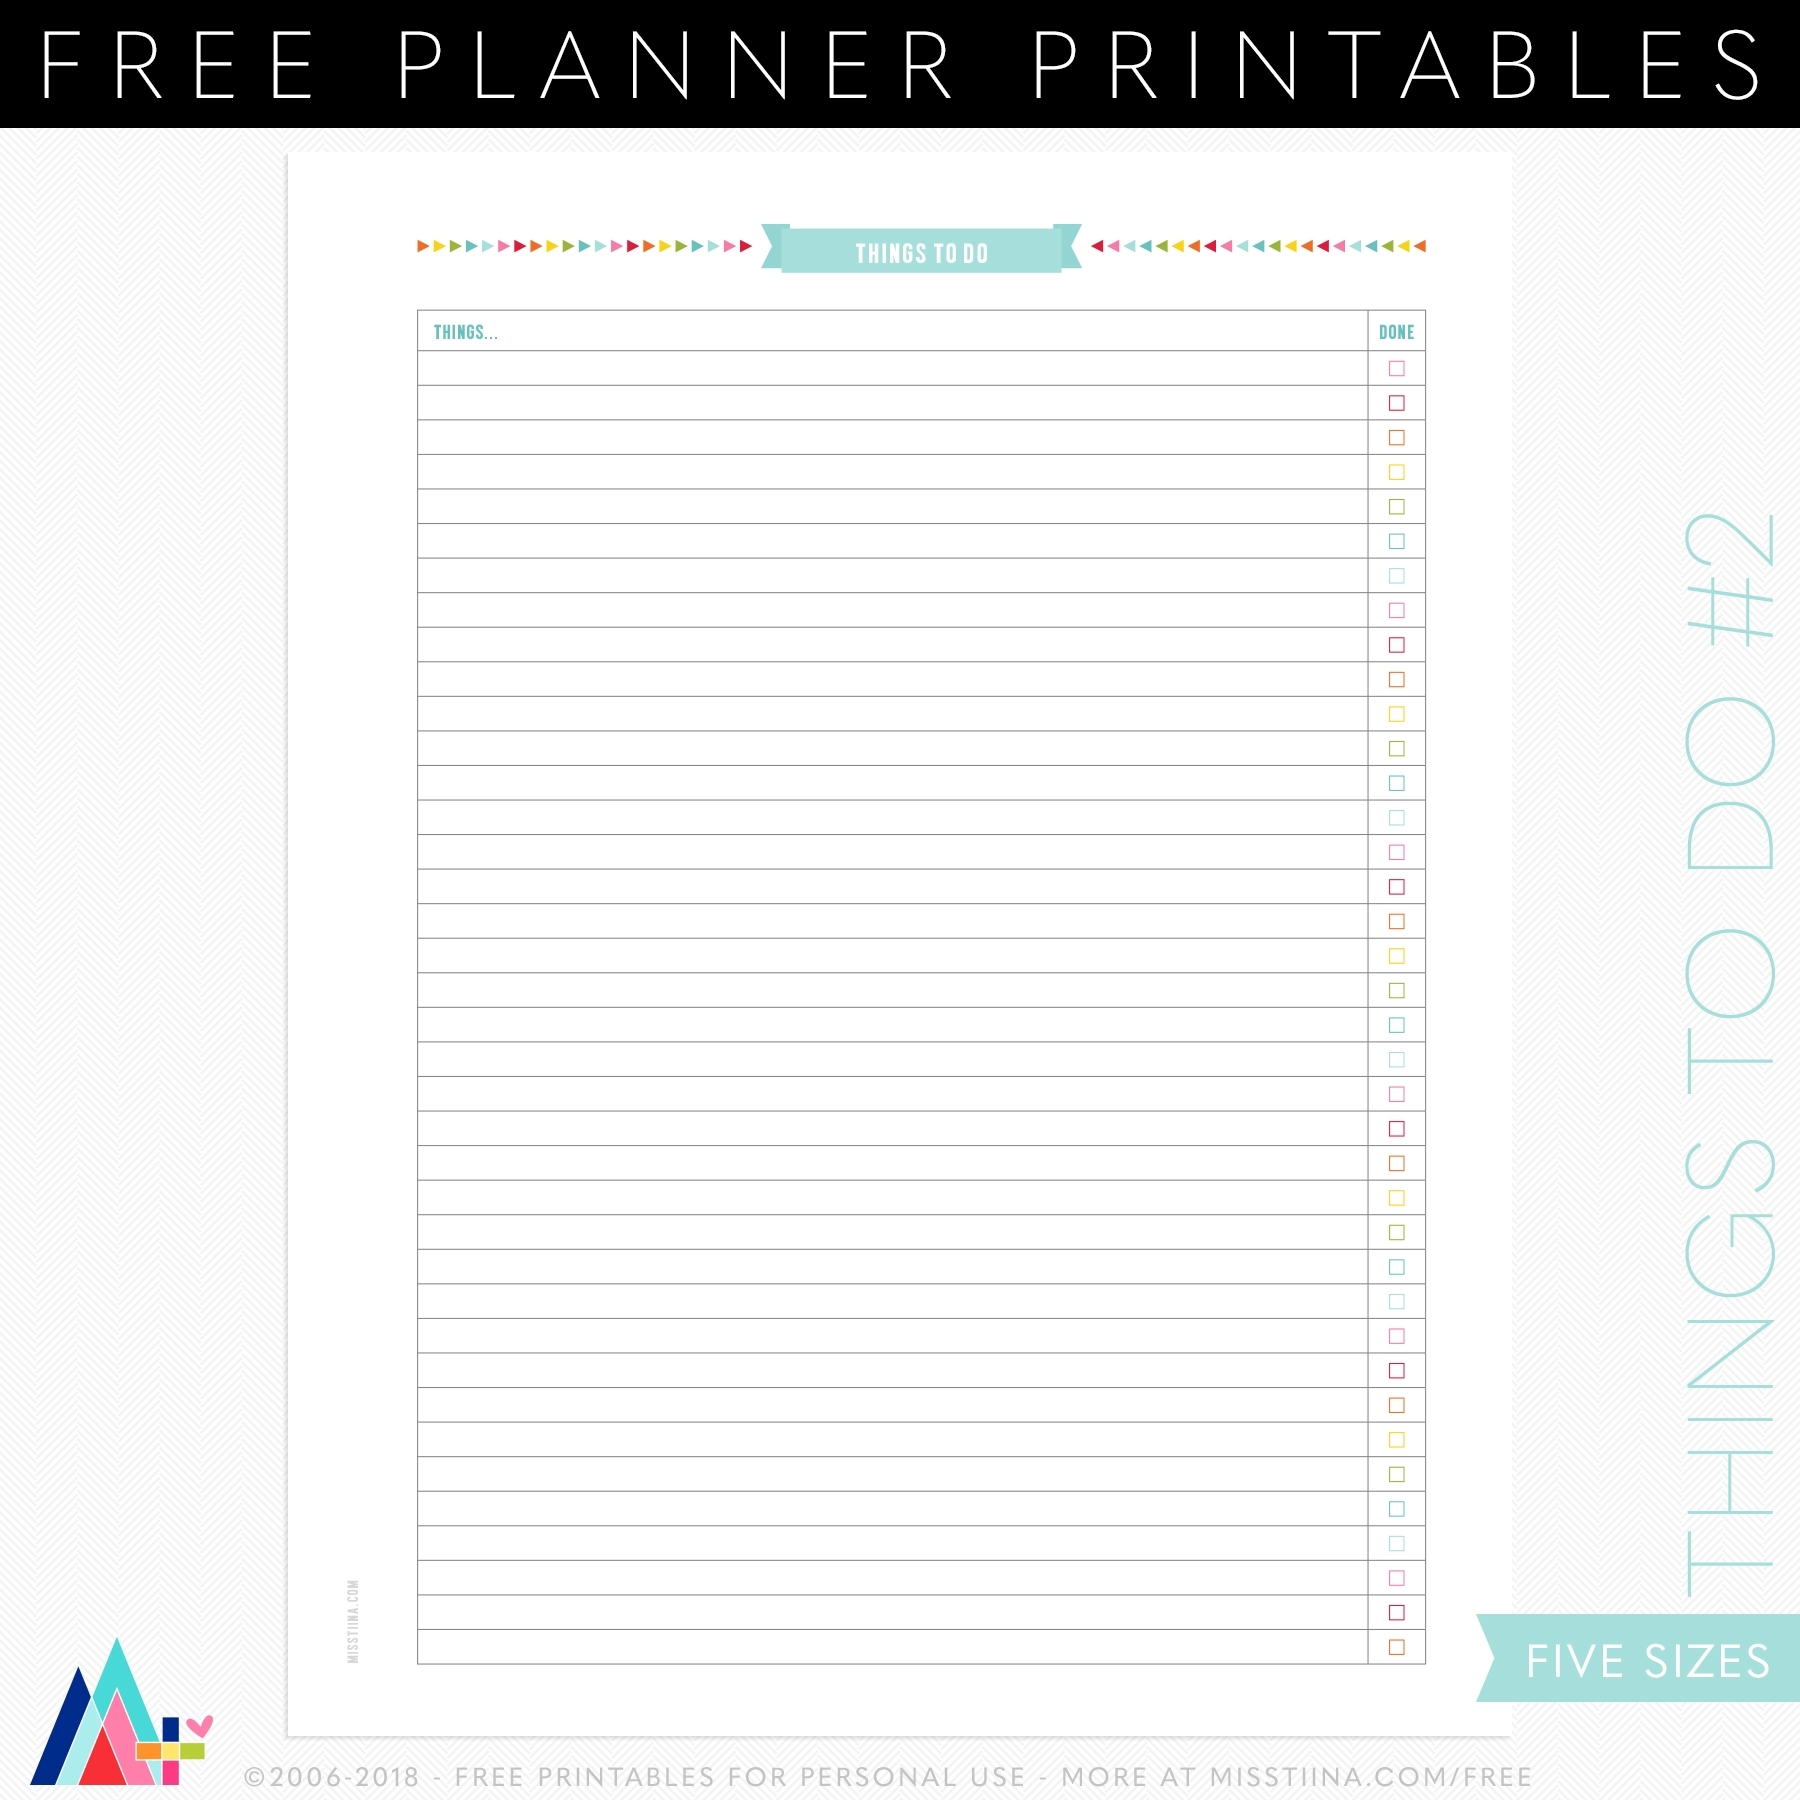 Free Planner Page Printables | Misstiina with Daily Planner Calendar Printable Half Page